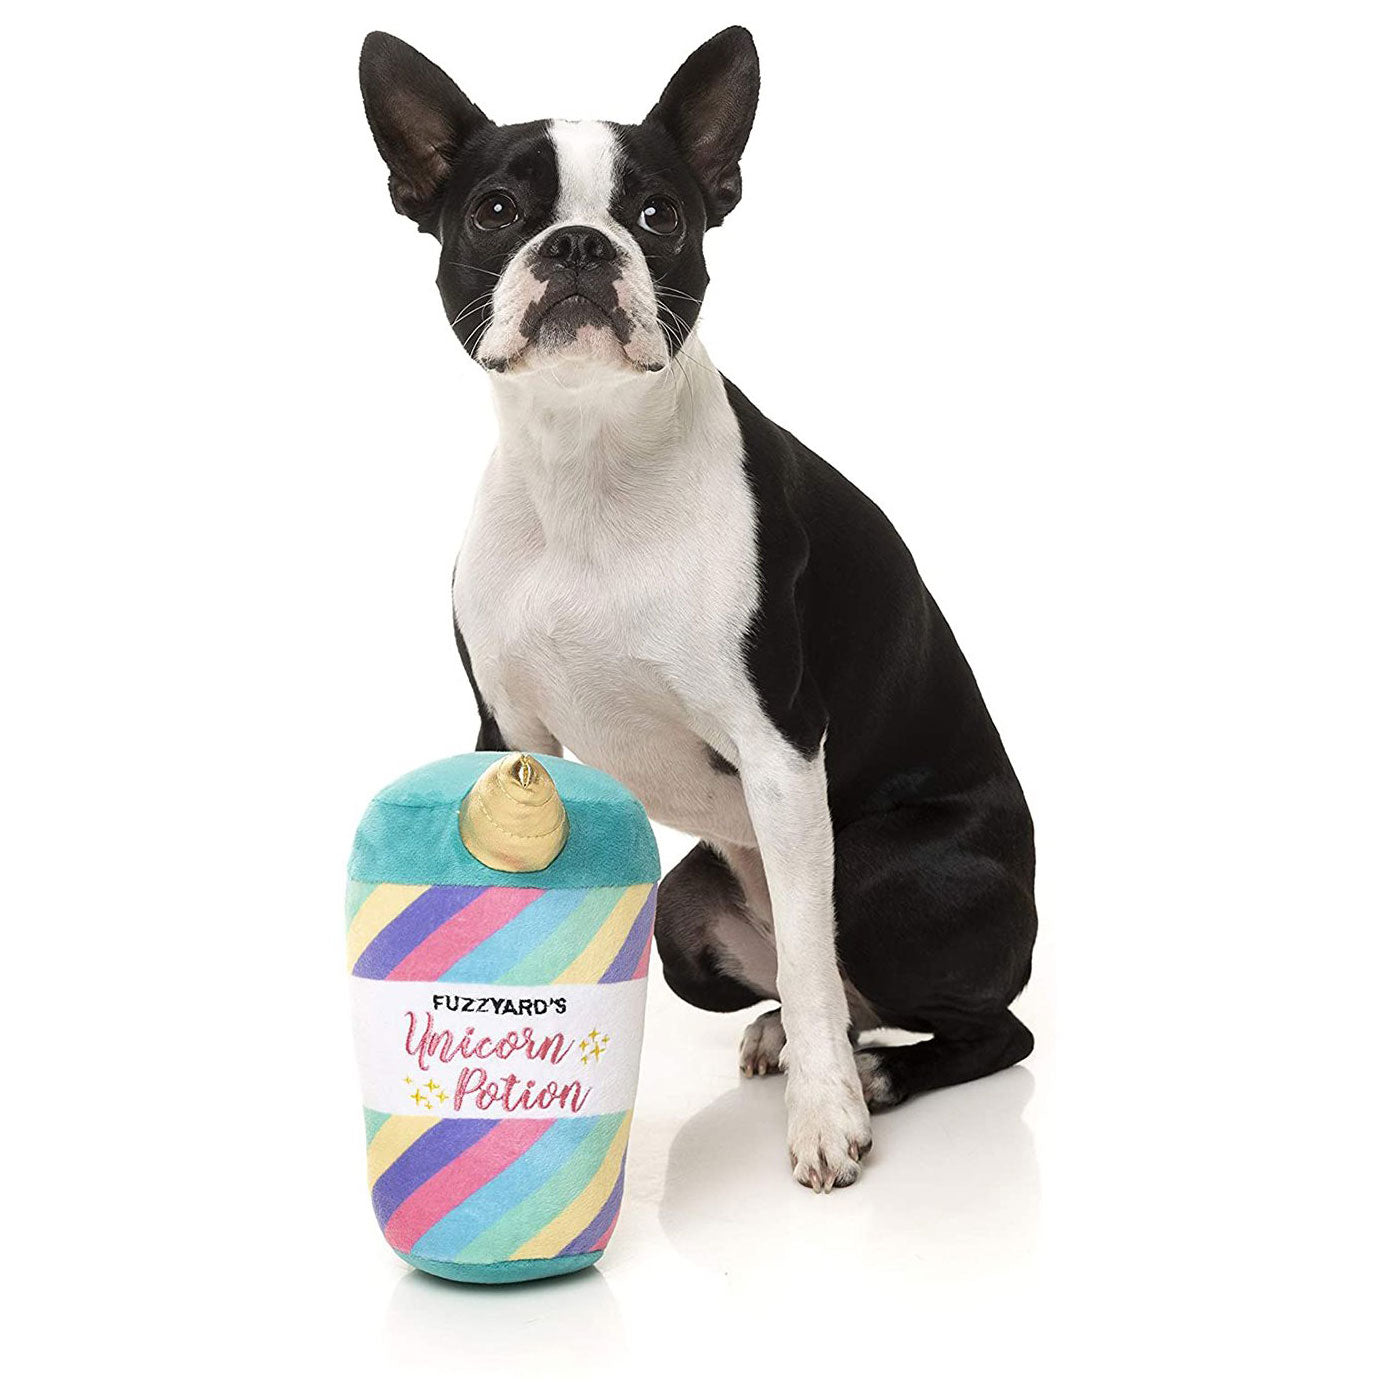 Discover Fuzzyard Unicorn Potion Toy. The perfect dog toy full of rainbows and cotton candy! Super cute and loads of fun, and machine washable. Available at Lords & Labradors